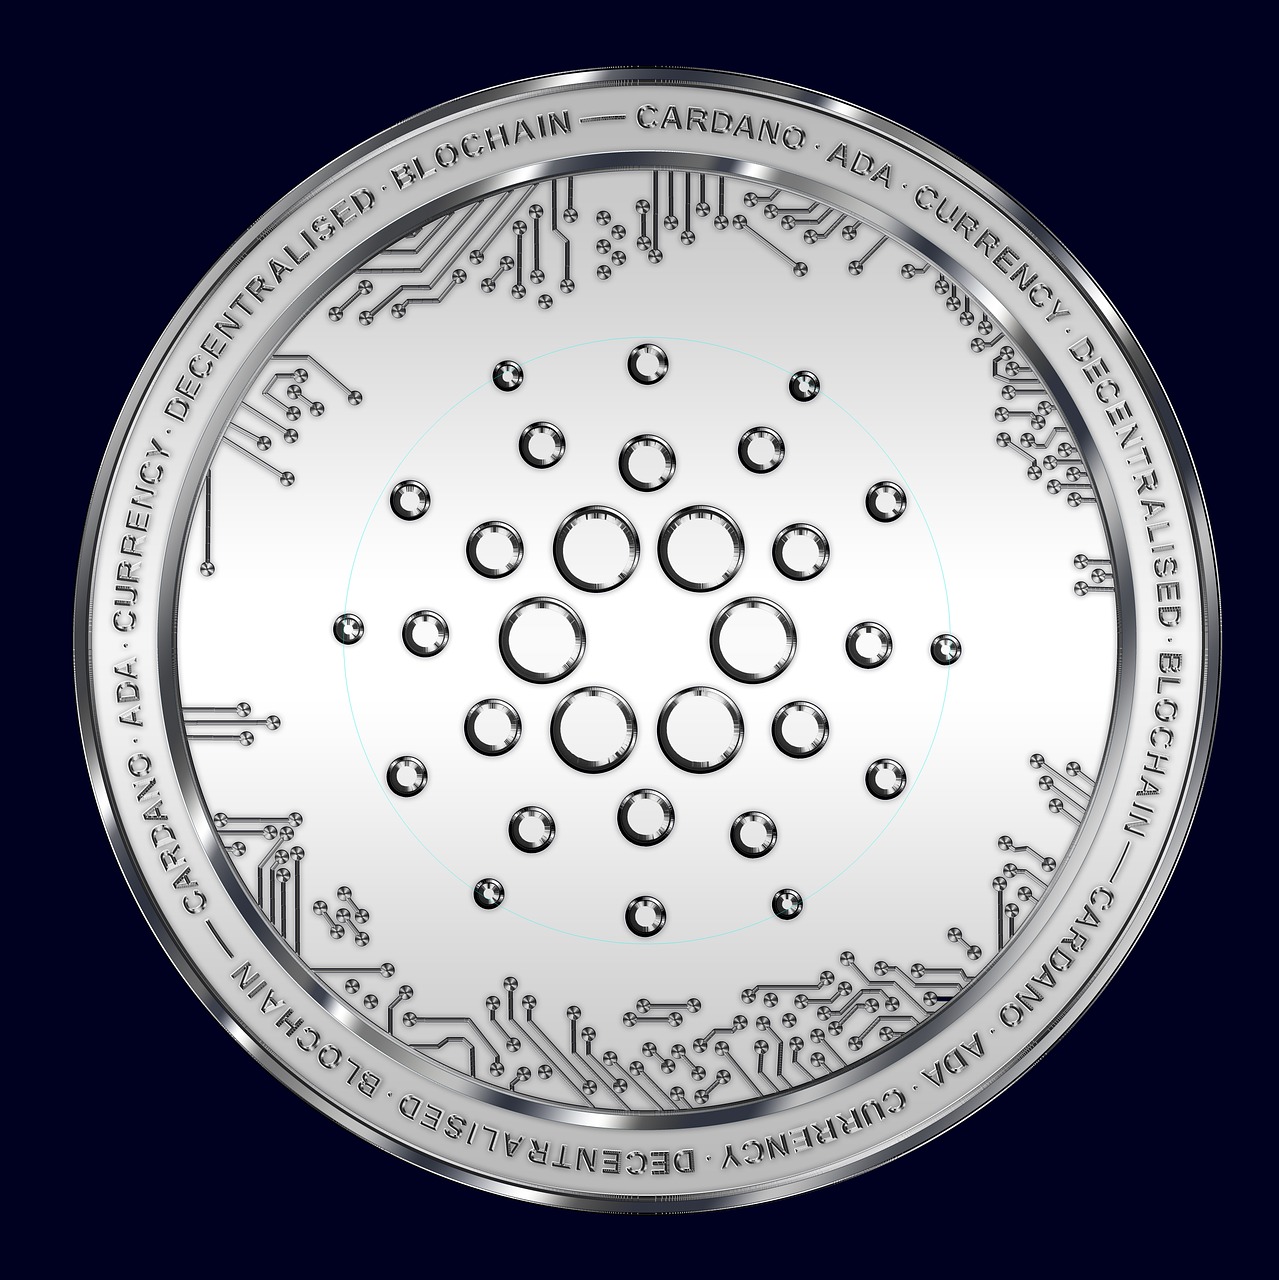 Cardano (ADA) Price Prediction: Will We See A Return To $0.4 Soon? - InsideBitcoins.com